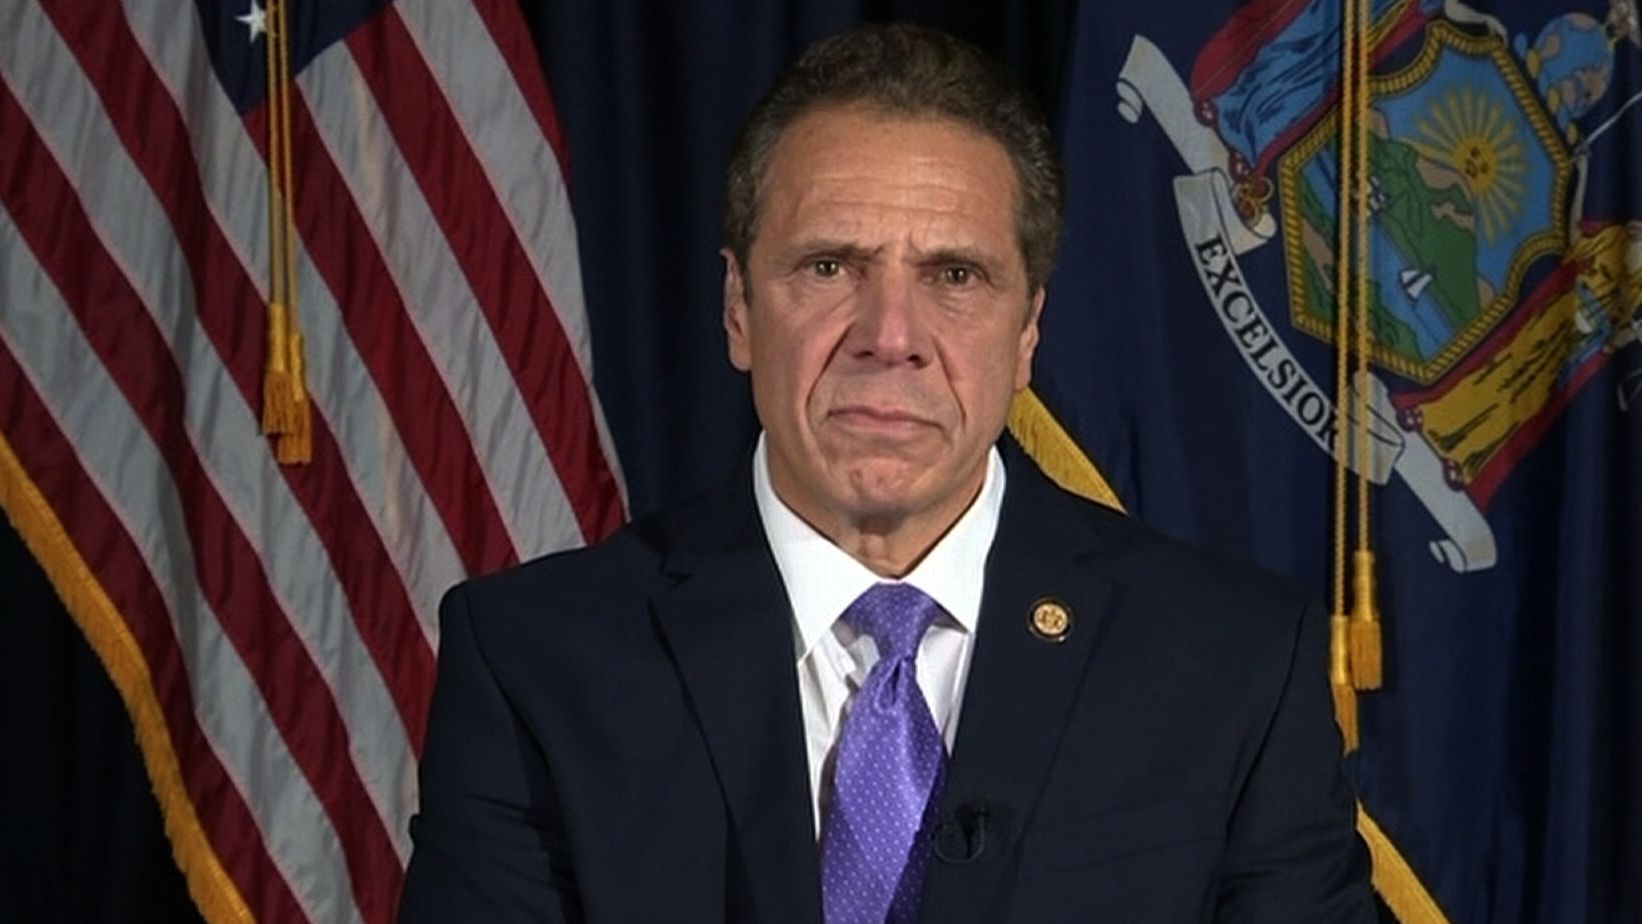 New York Gov. Andrew Cuomo signed into law a bill that protects abortion rights in the state.